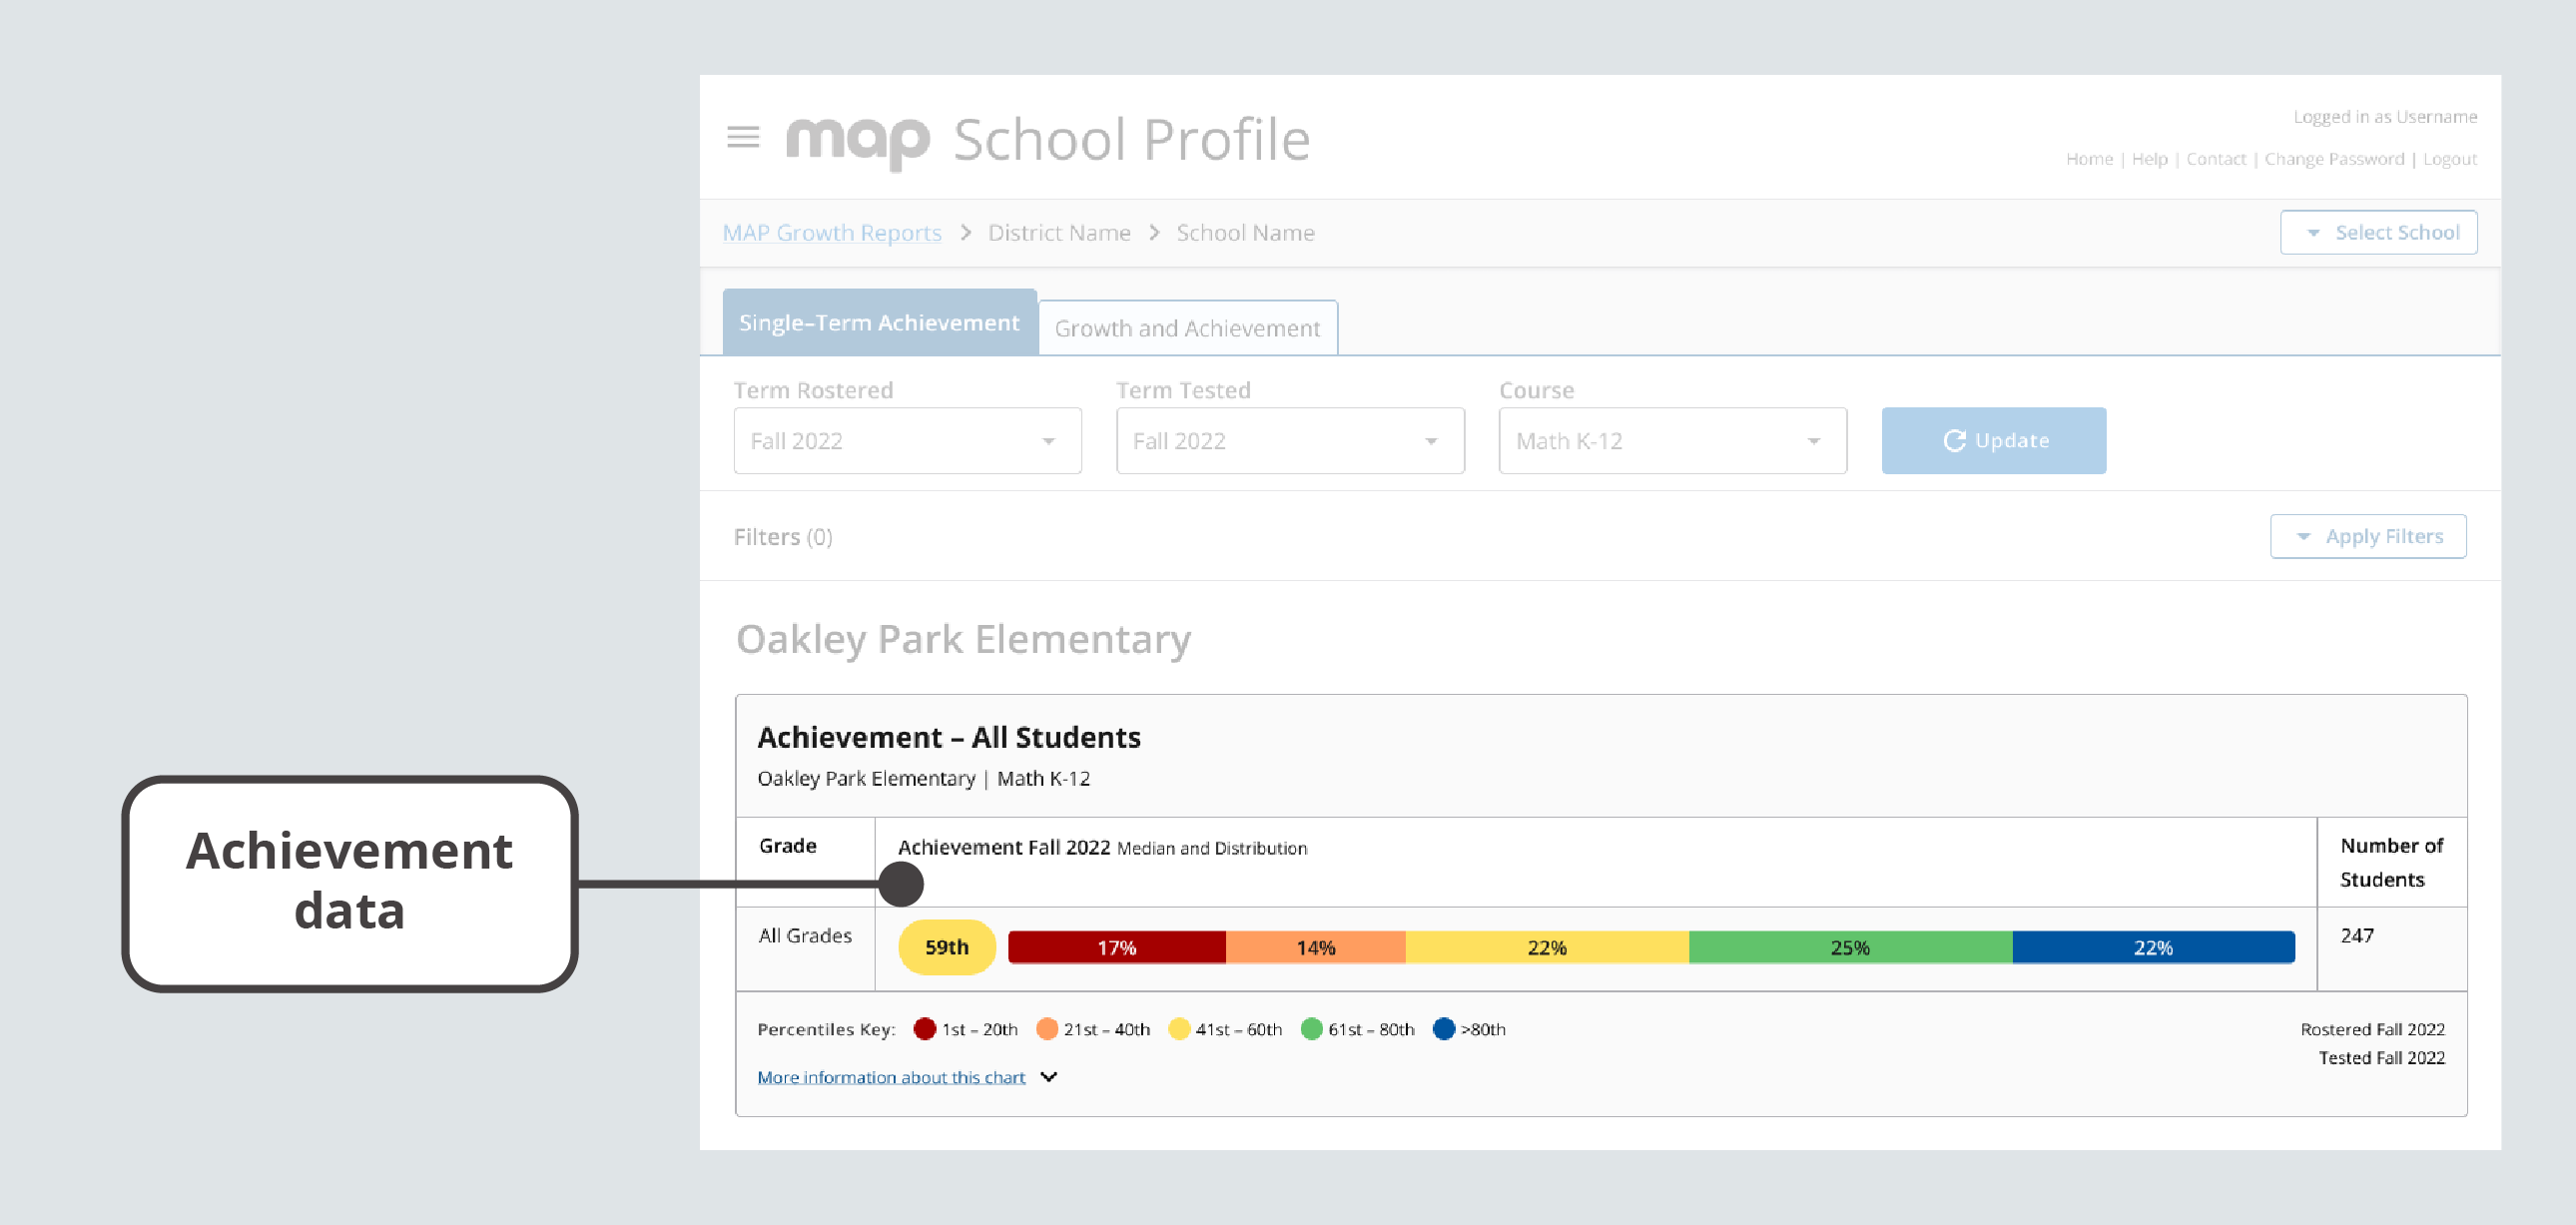 The Single-Term Achievement tab displays data for grades, median percentiles, achievement percentile breakdowns by quintile, and the number of students for a single term.